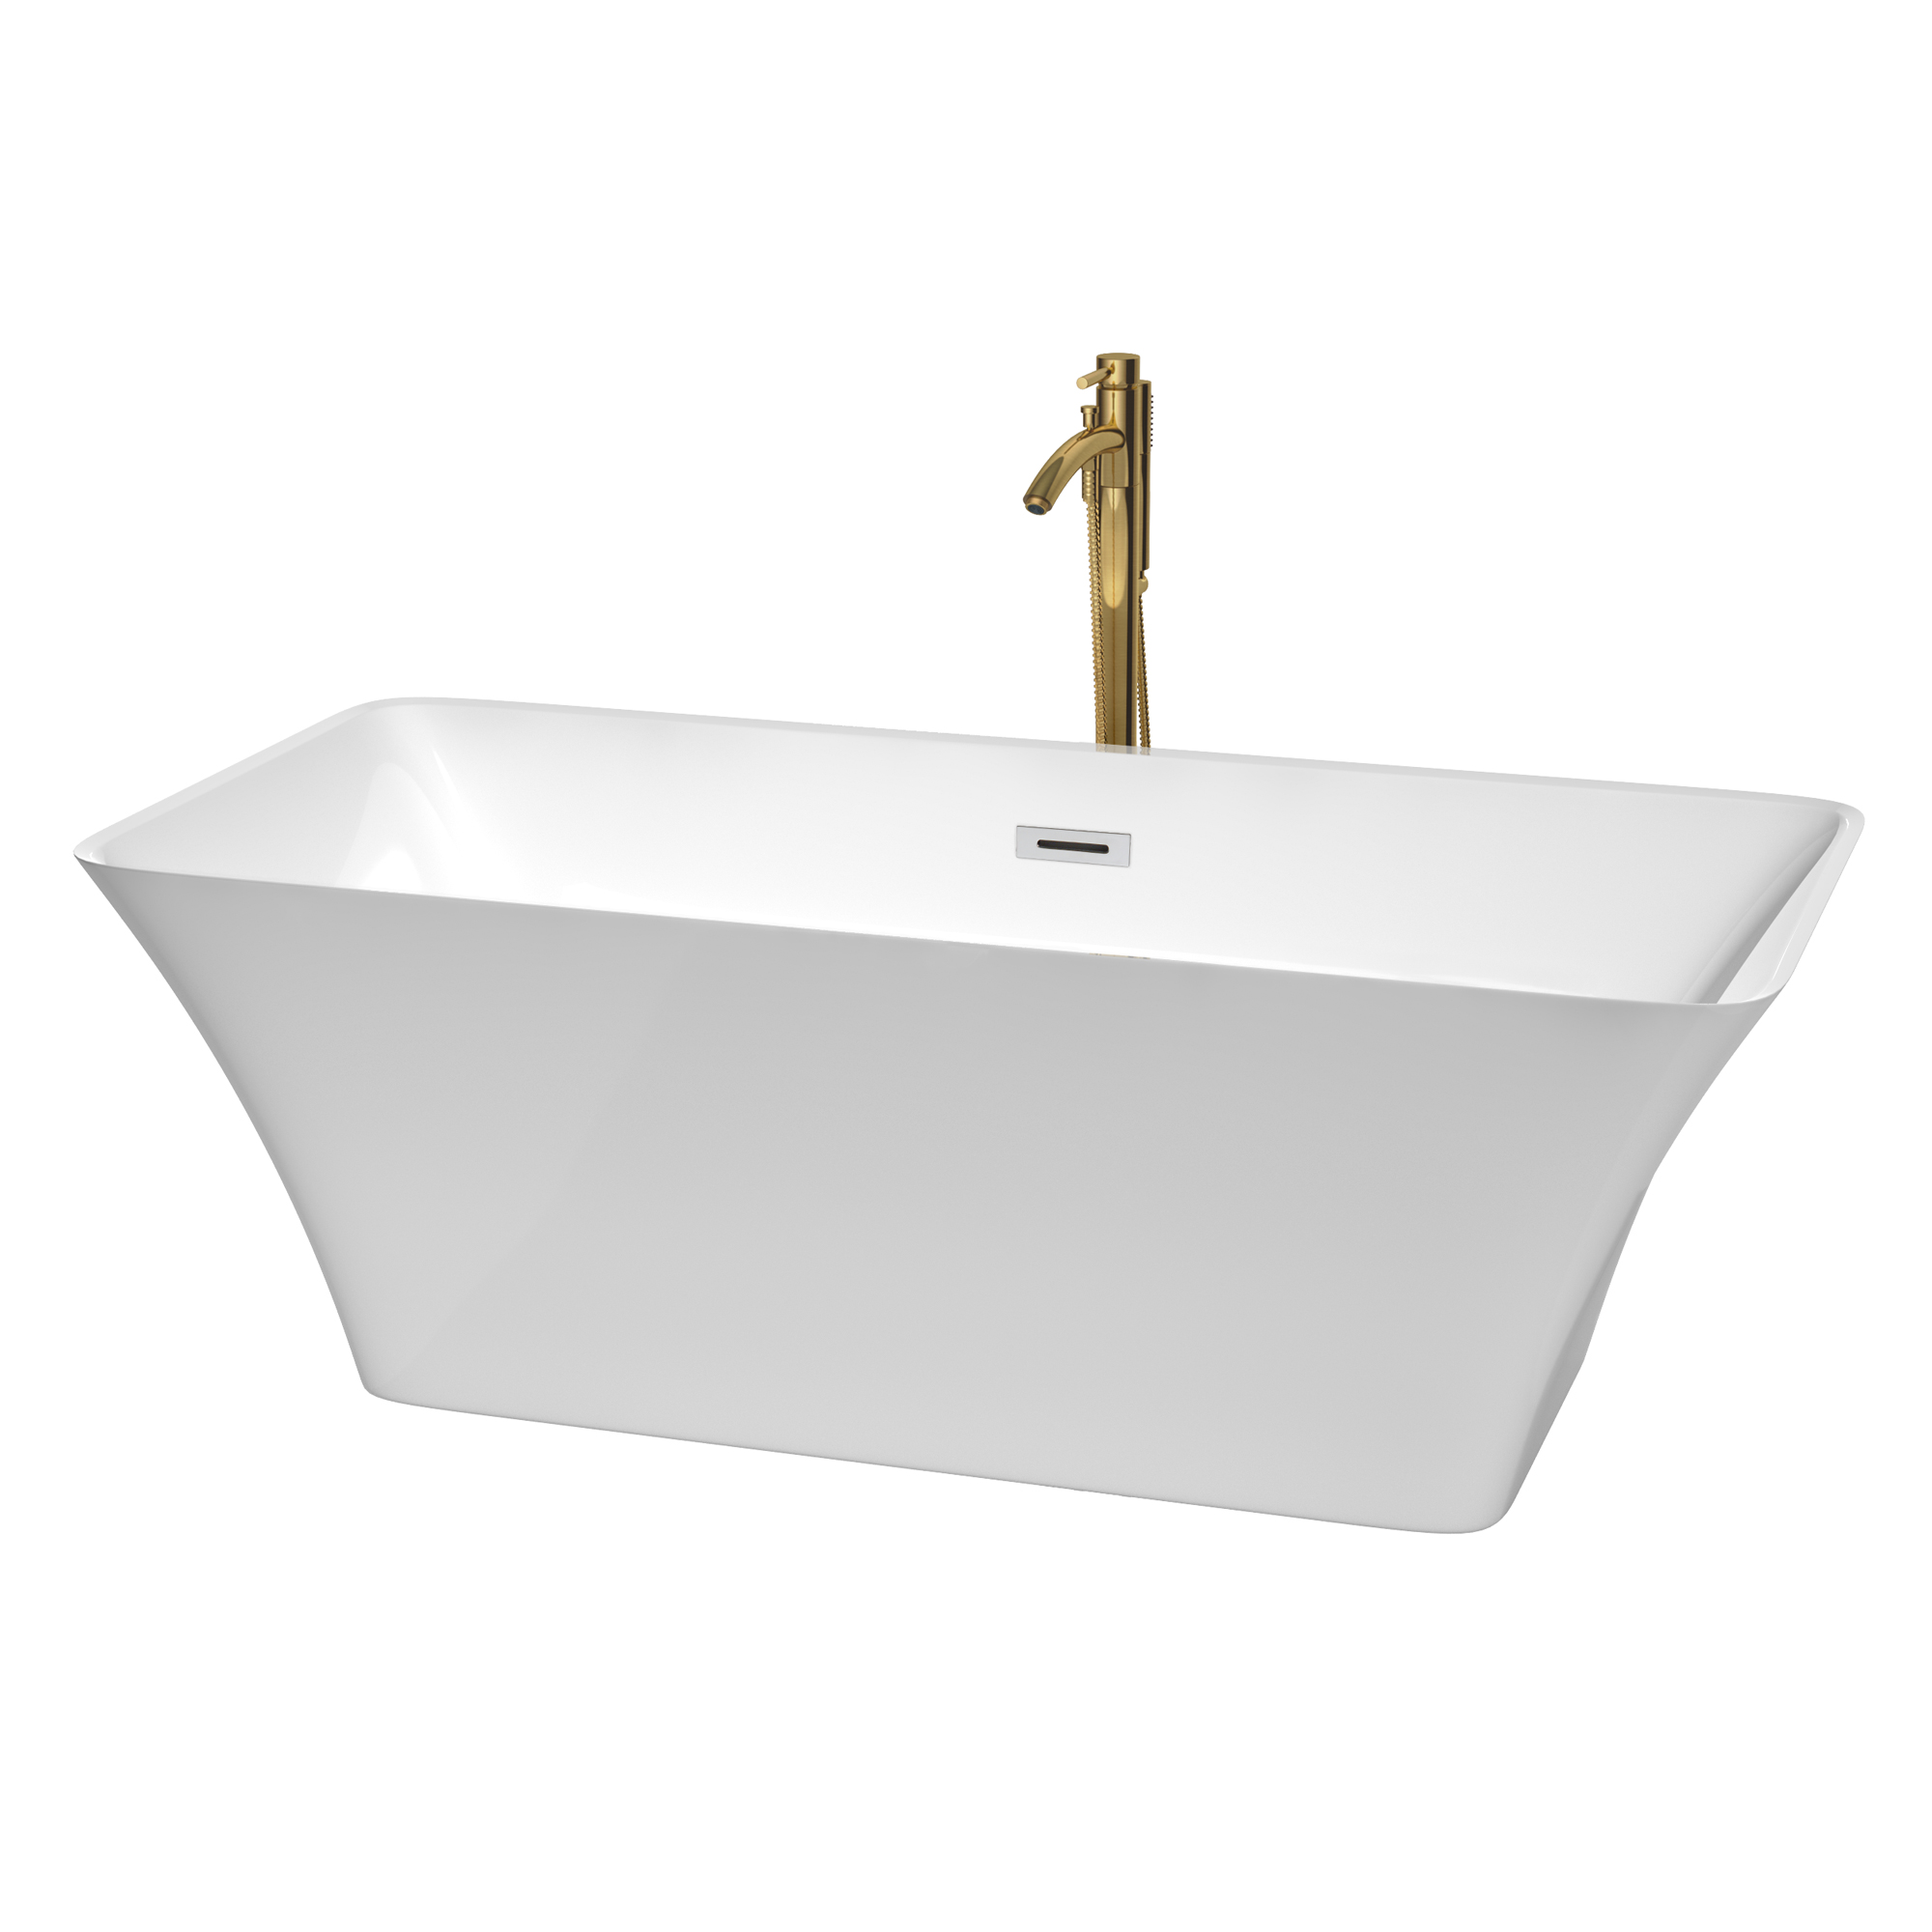 67" Freestanding Bathtub in White with Polished Chrome Trim and Floor Mounted Faucet in Brushed Gold